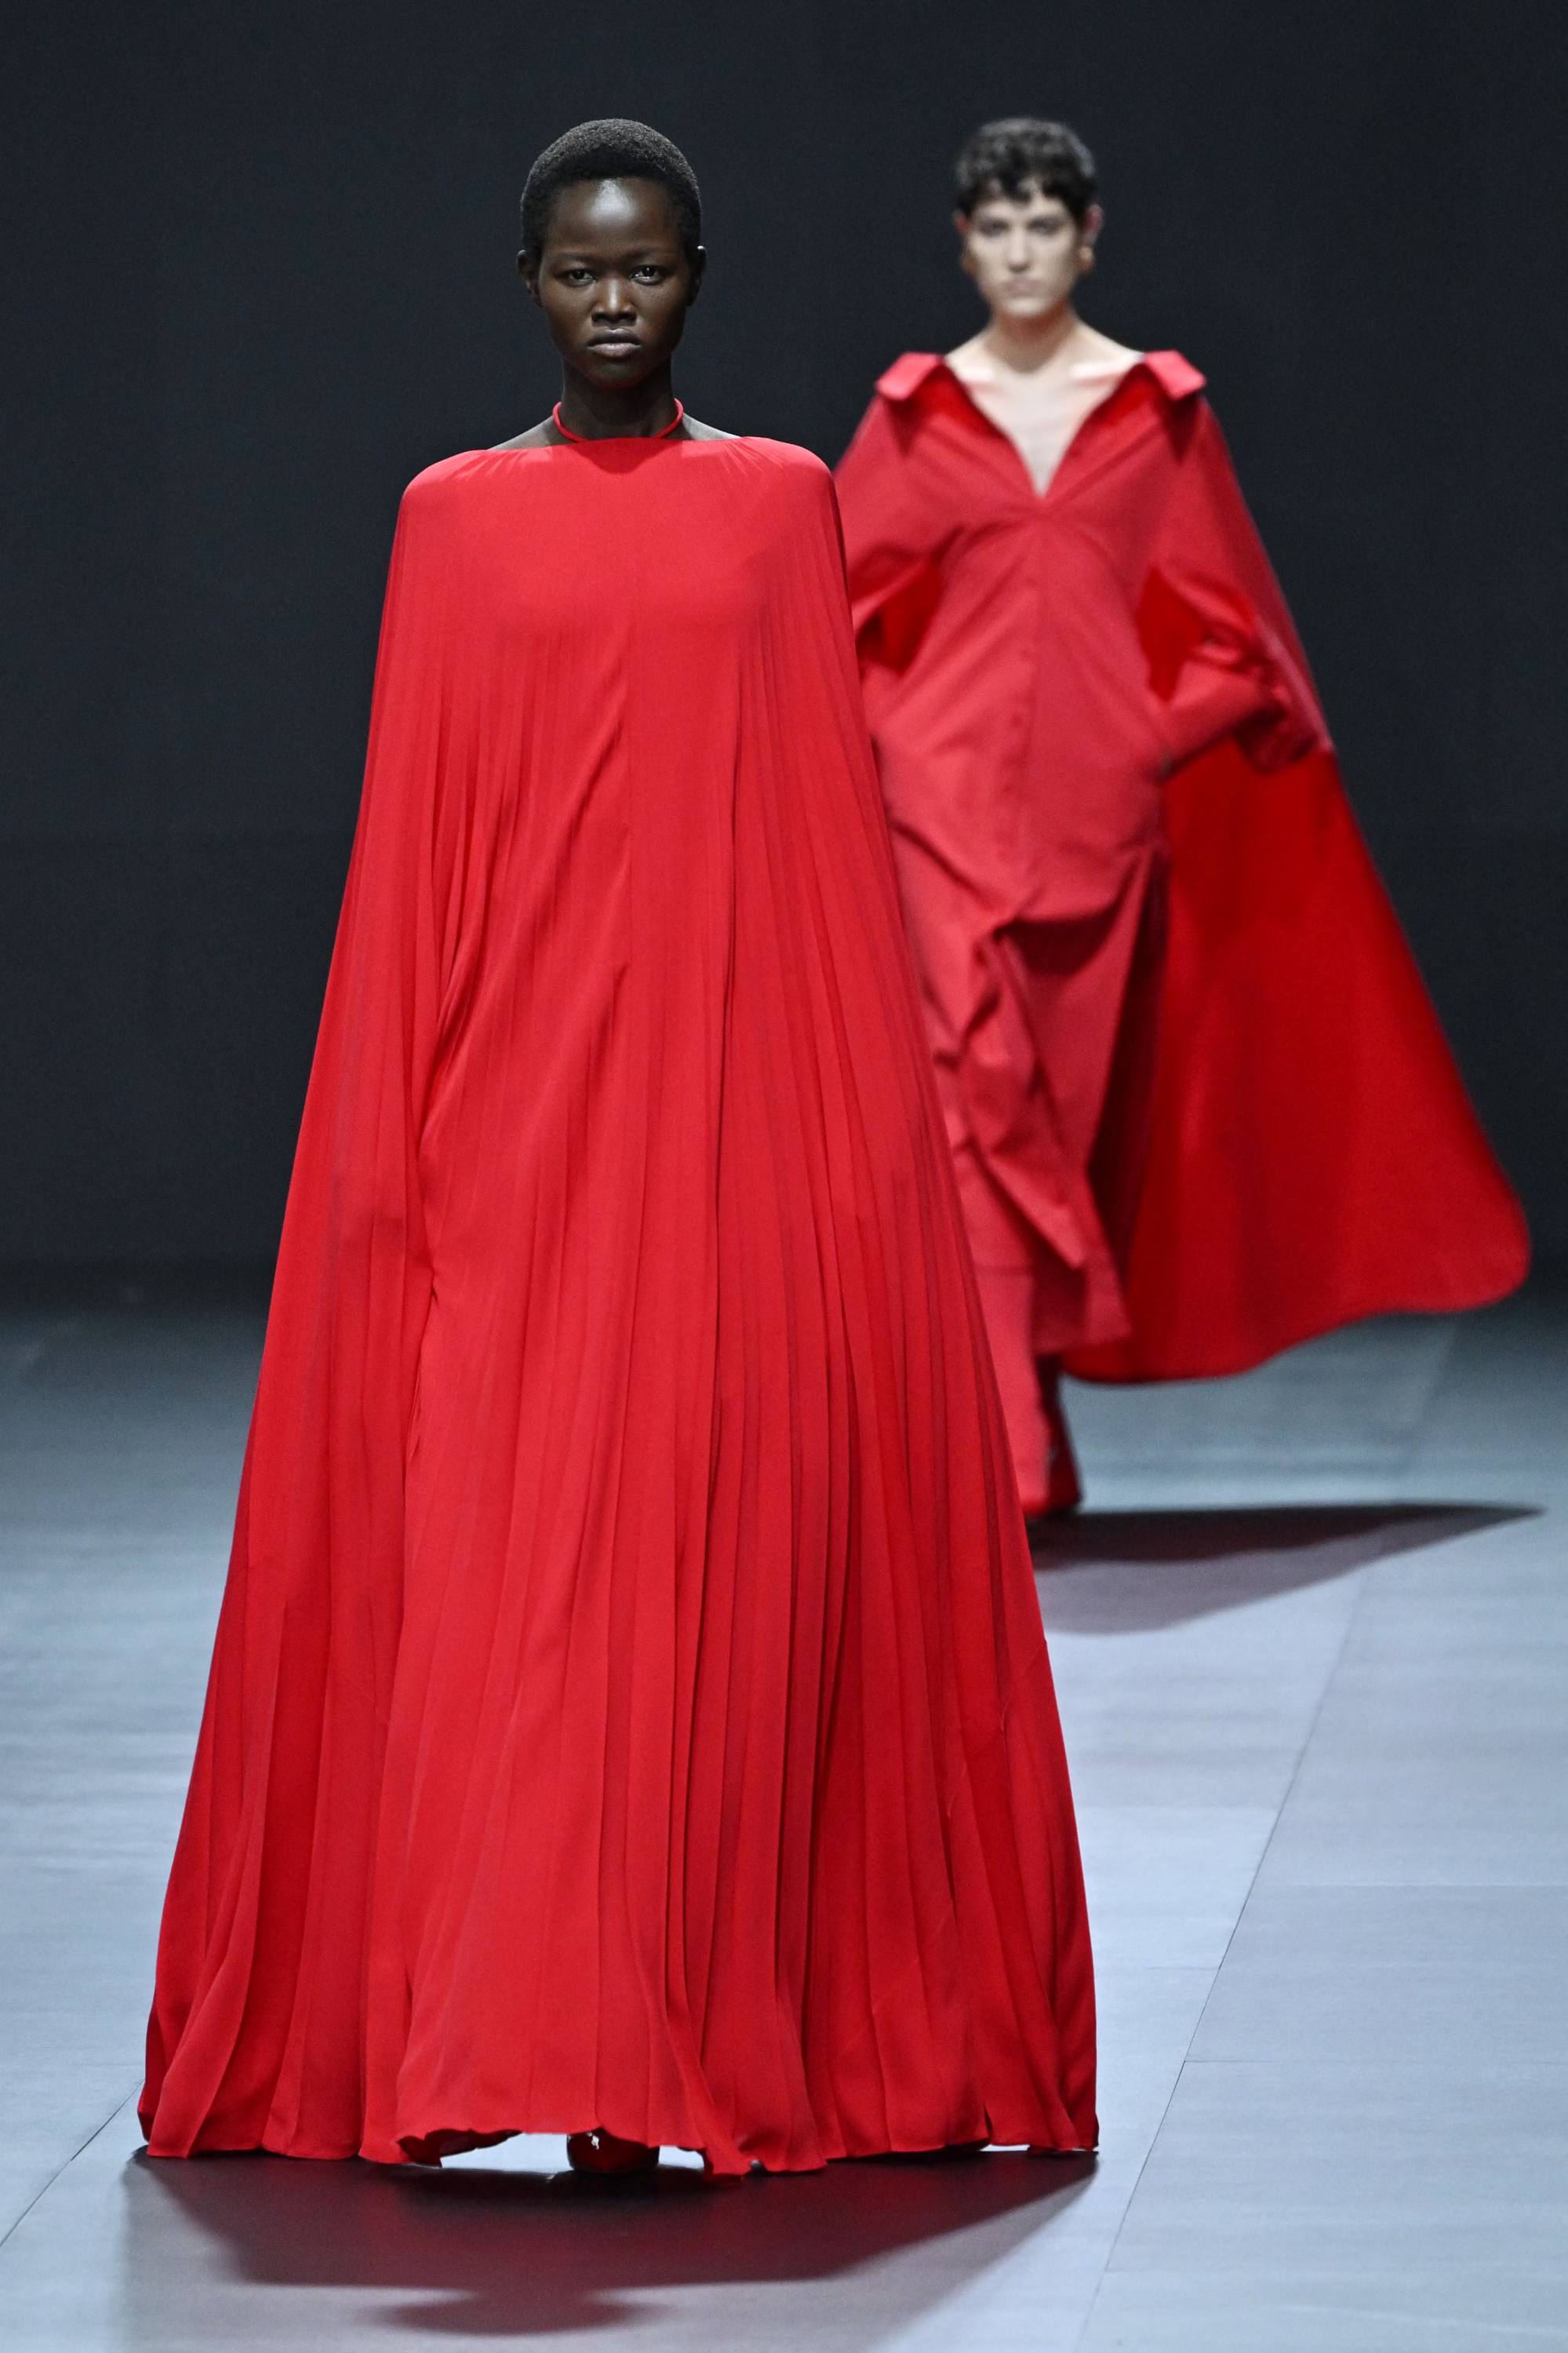 Iconic red looks from the recent Haute Couture and Paris Men's